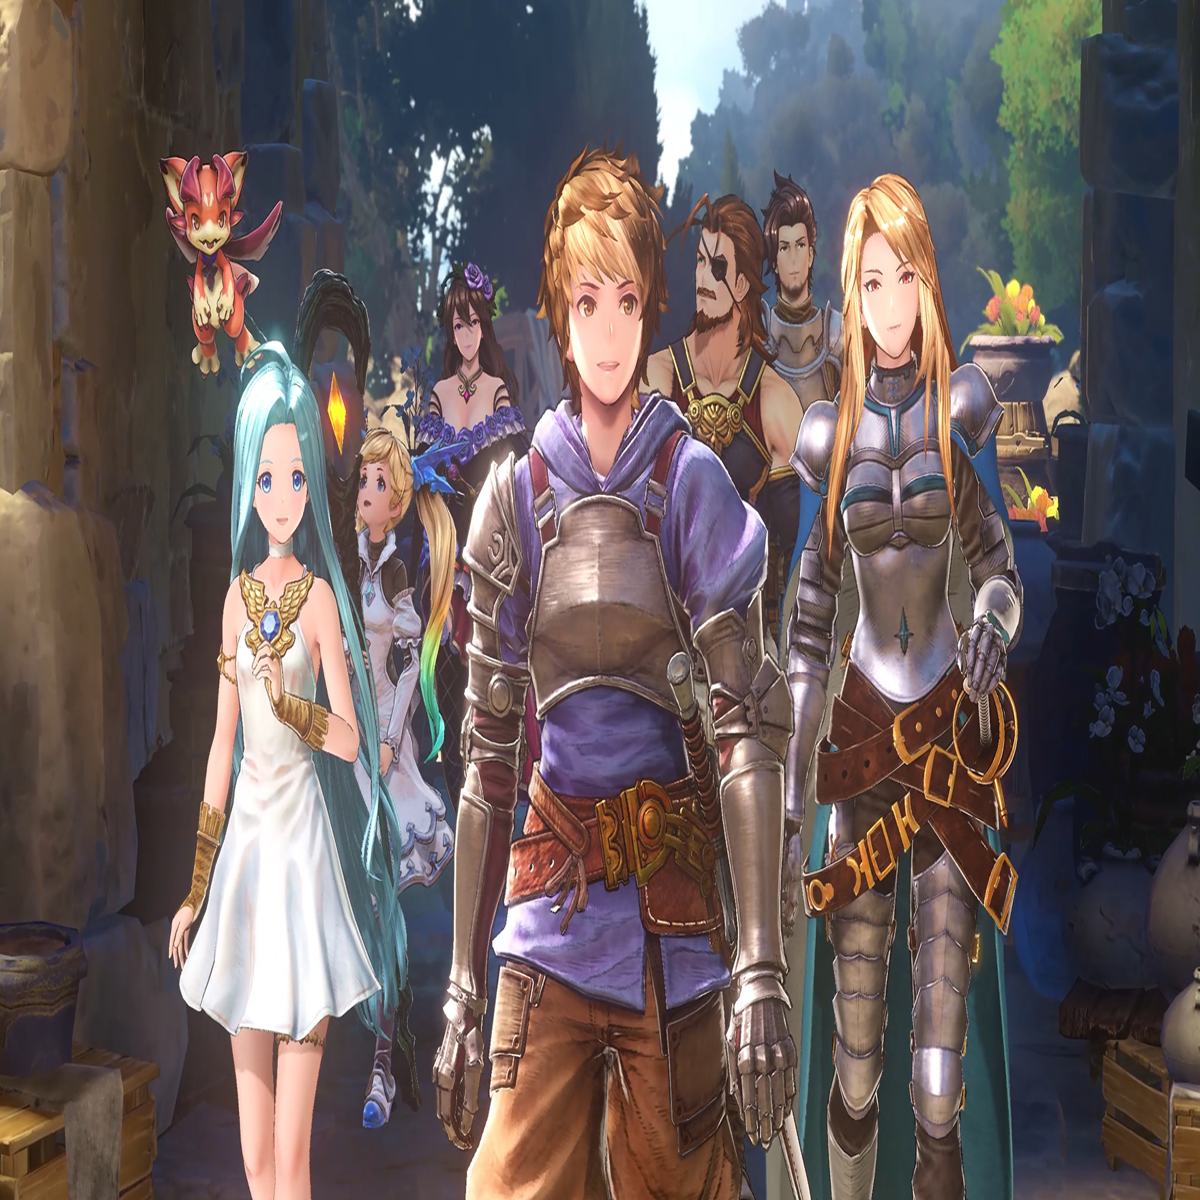 Granblue Fantasy Relink Might Release on PC as well as PS4; New Footage and  Details from Developers